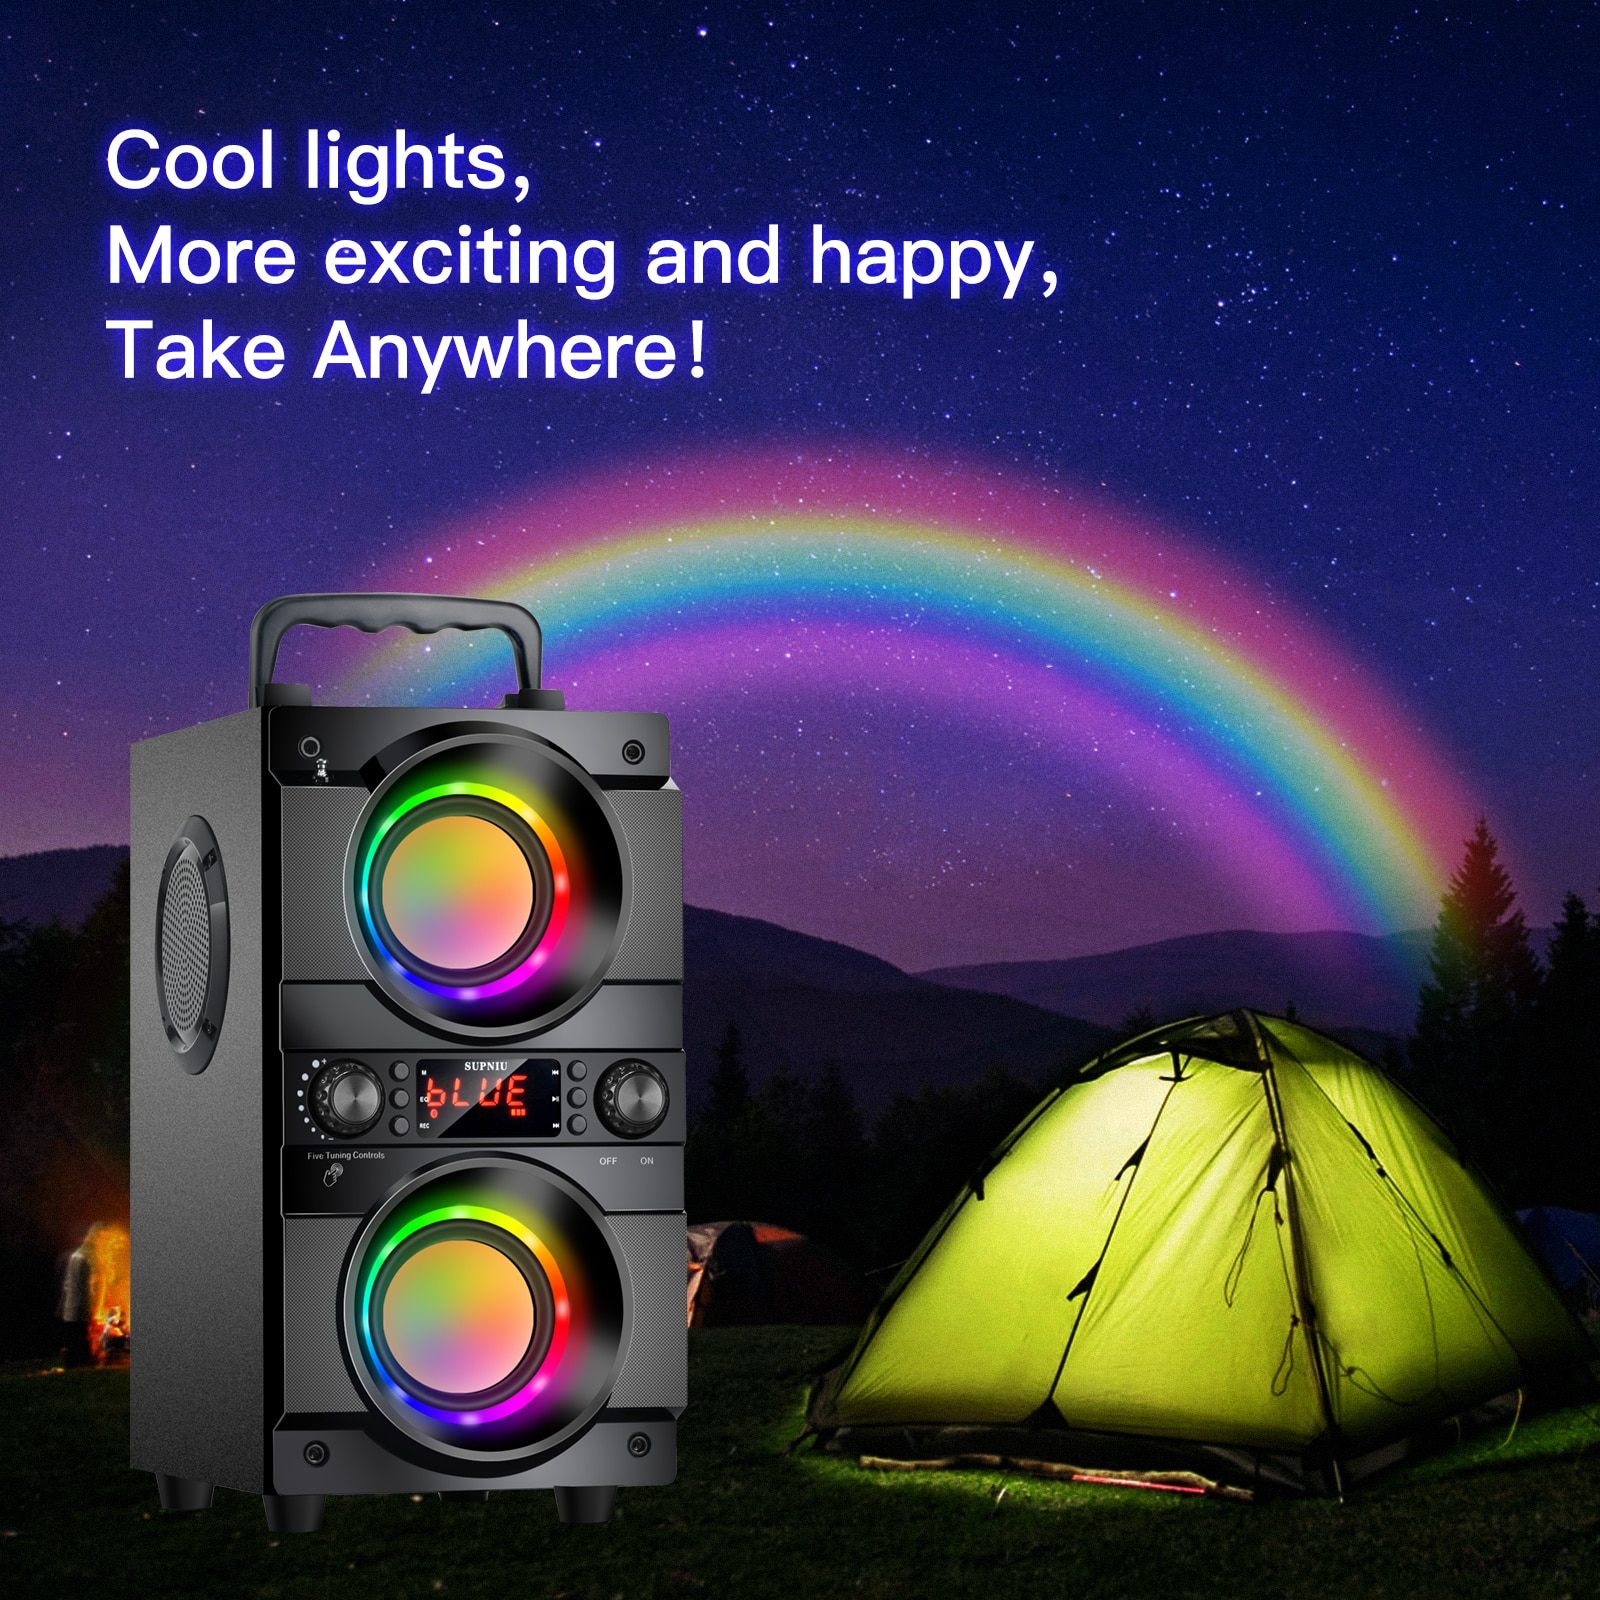 One Piece, Mobile Computer Wireless Bluetooth Audio Subwoofer Outdoor Portable Square Dance Loudspeaker